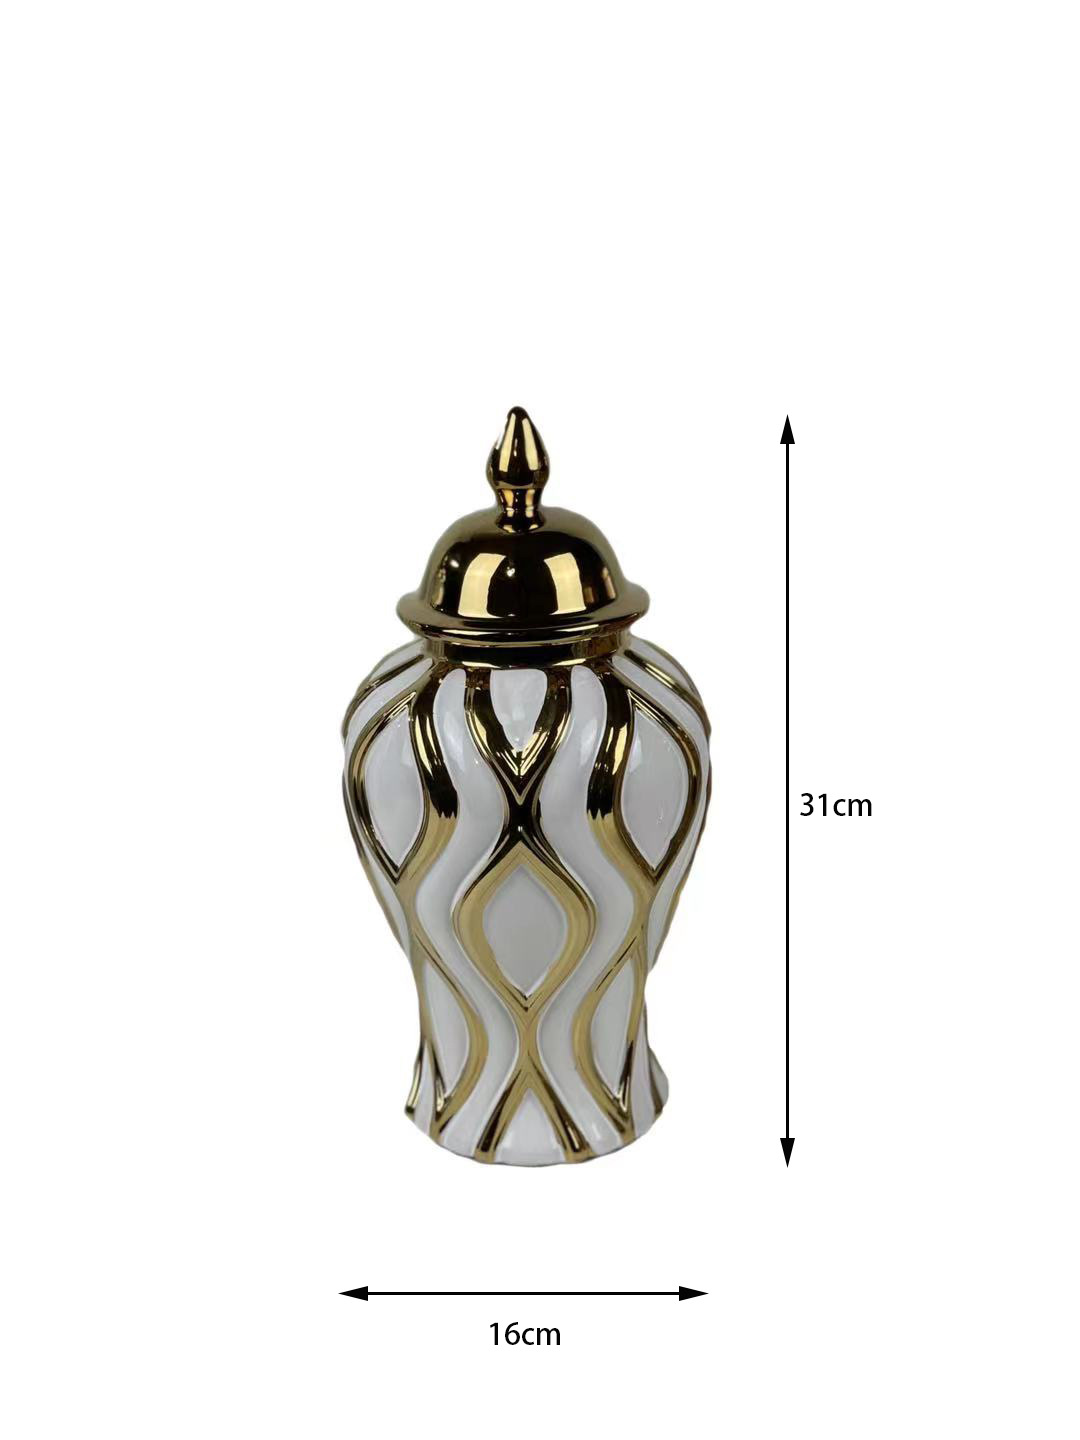 European-Style Electroplated Diamond Double-Spin Electroplated Ceramic Stripes Temple Jar Model Room Living Room and Hotel Black Gold Platinum Vase